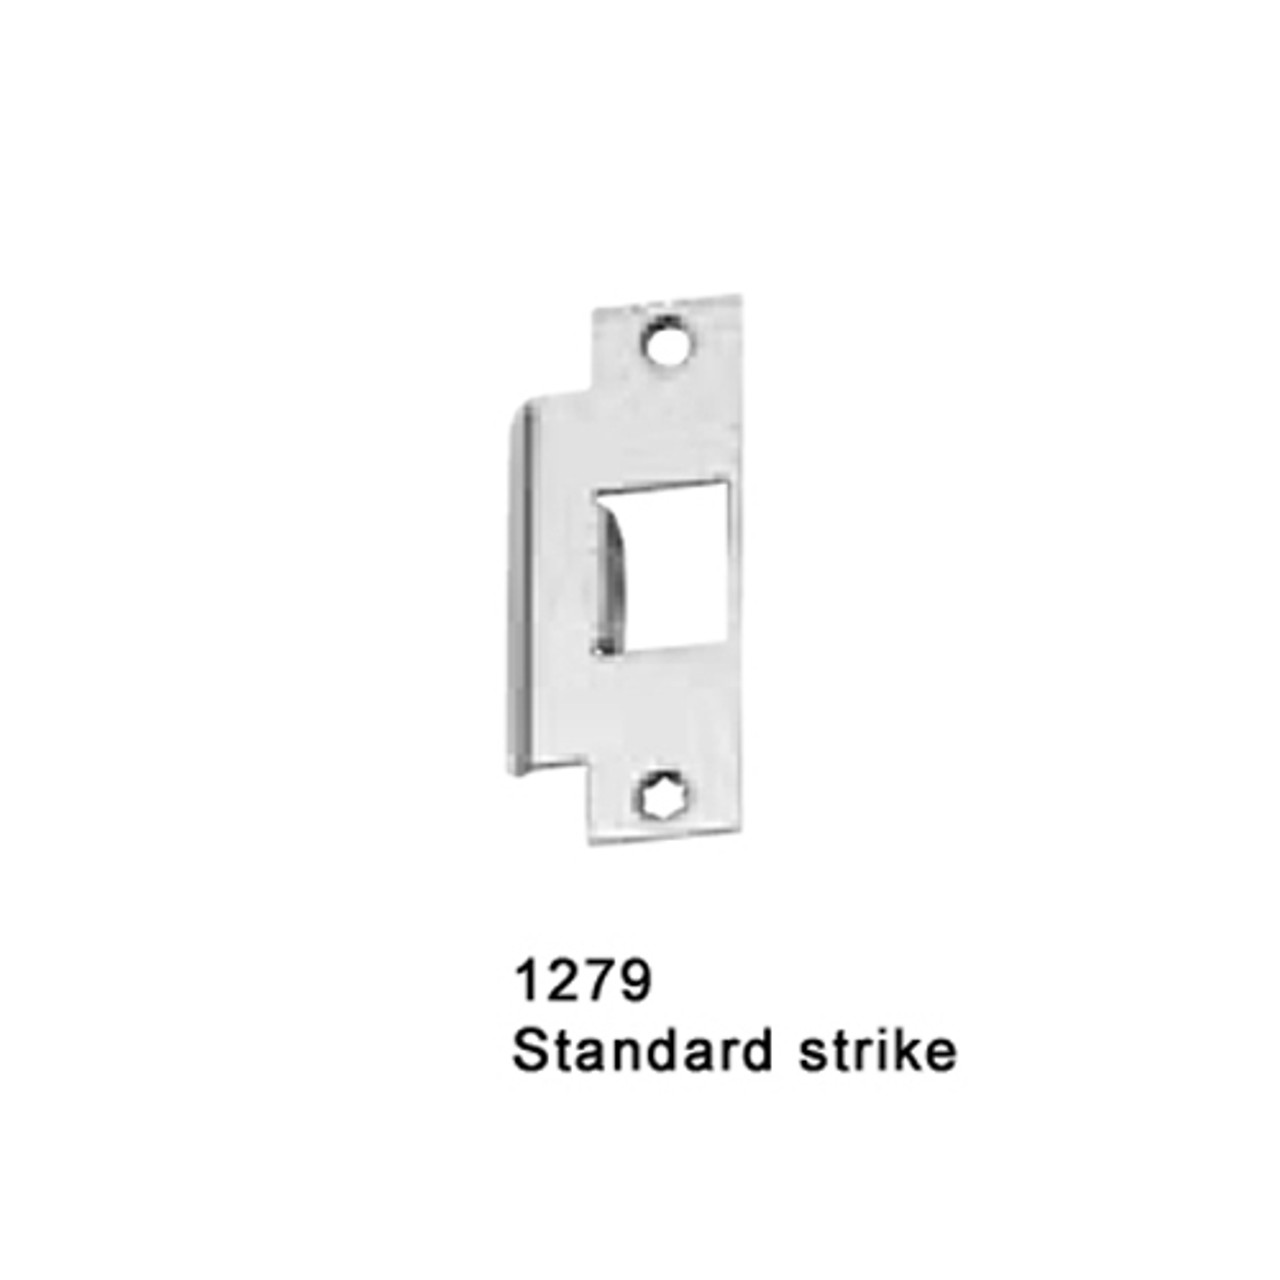 CD25-M-DT-US26D-3-LHR Falcon 25 Series Mortise Lock Devices with 512DT Dummy Trim in Satin Chrome